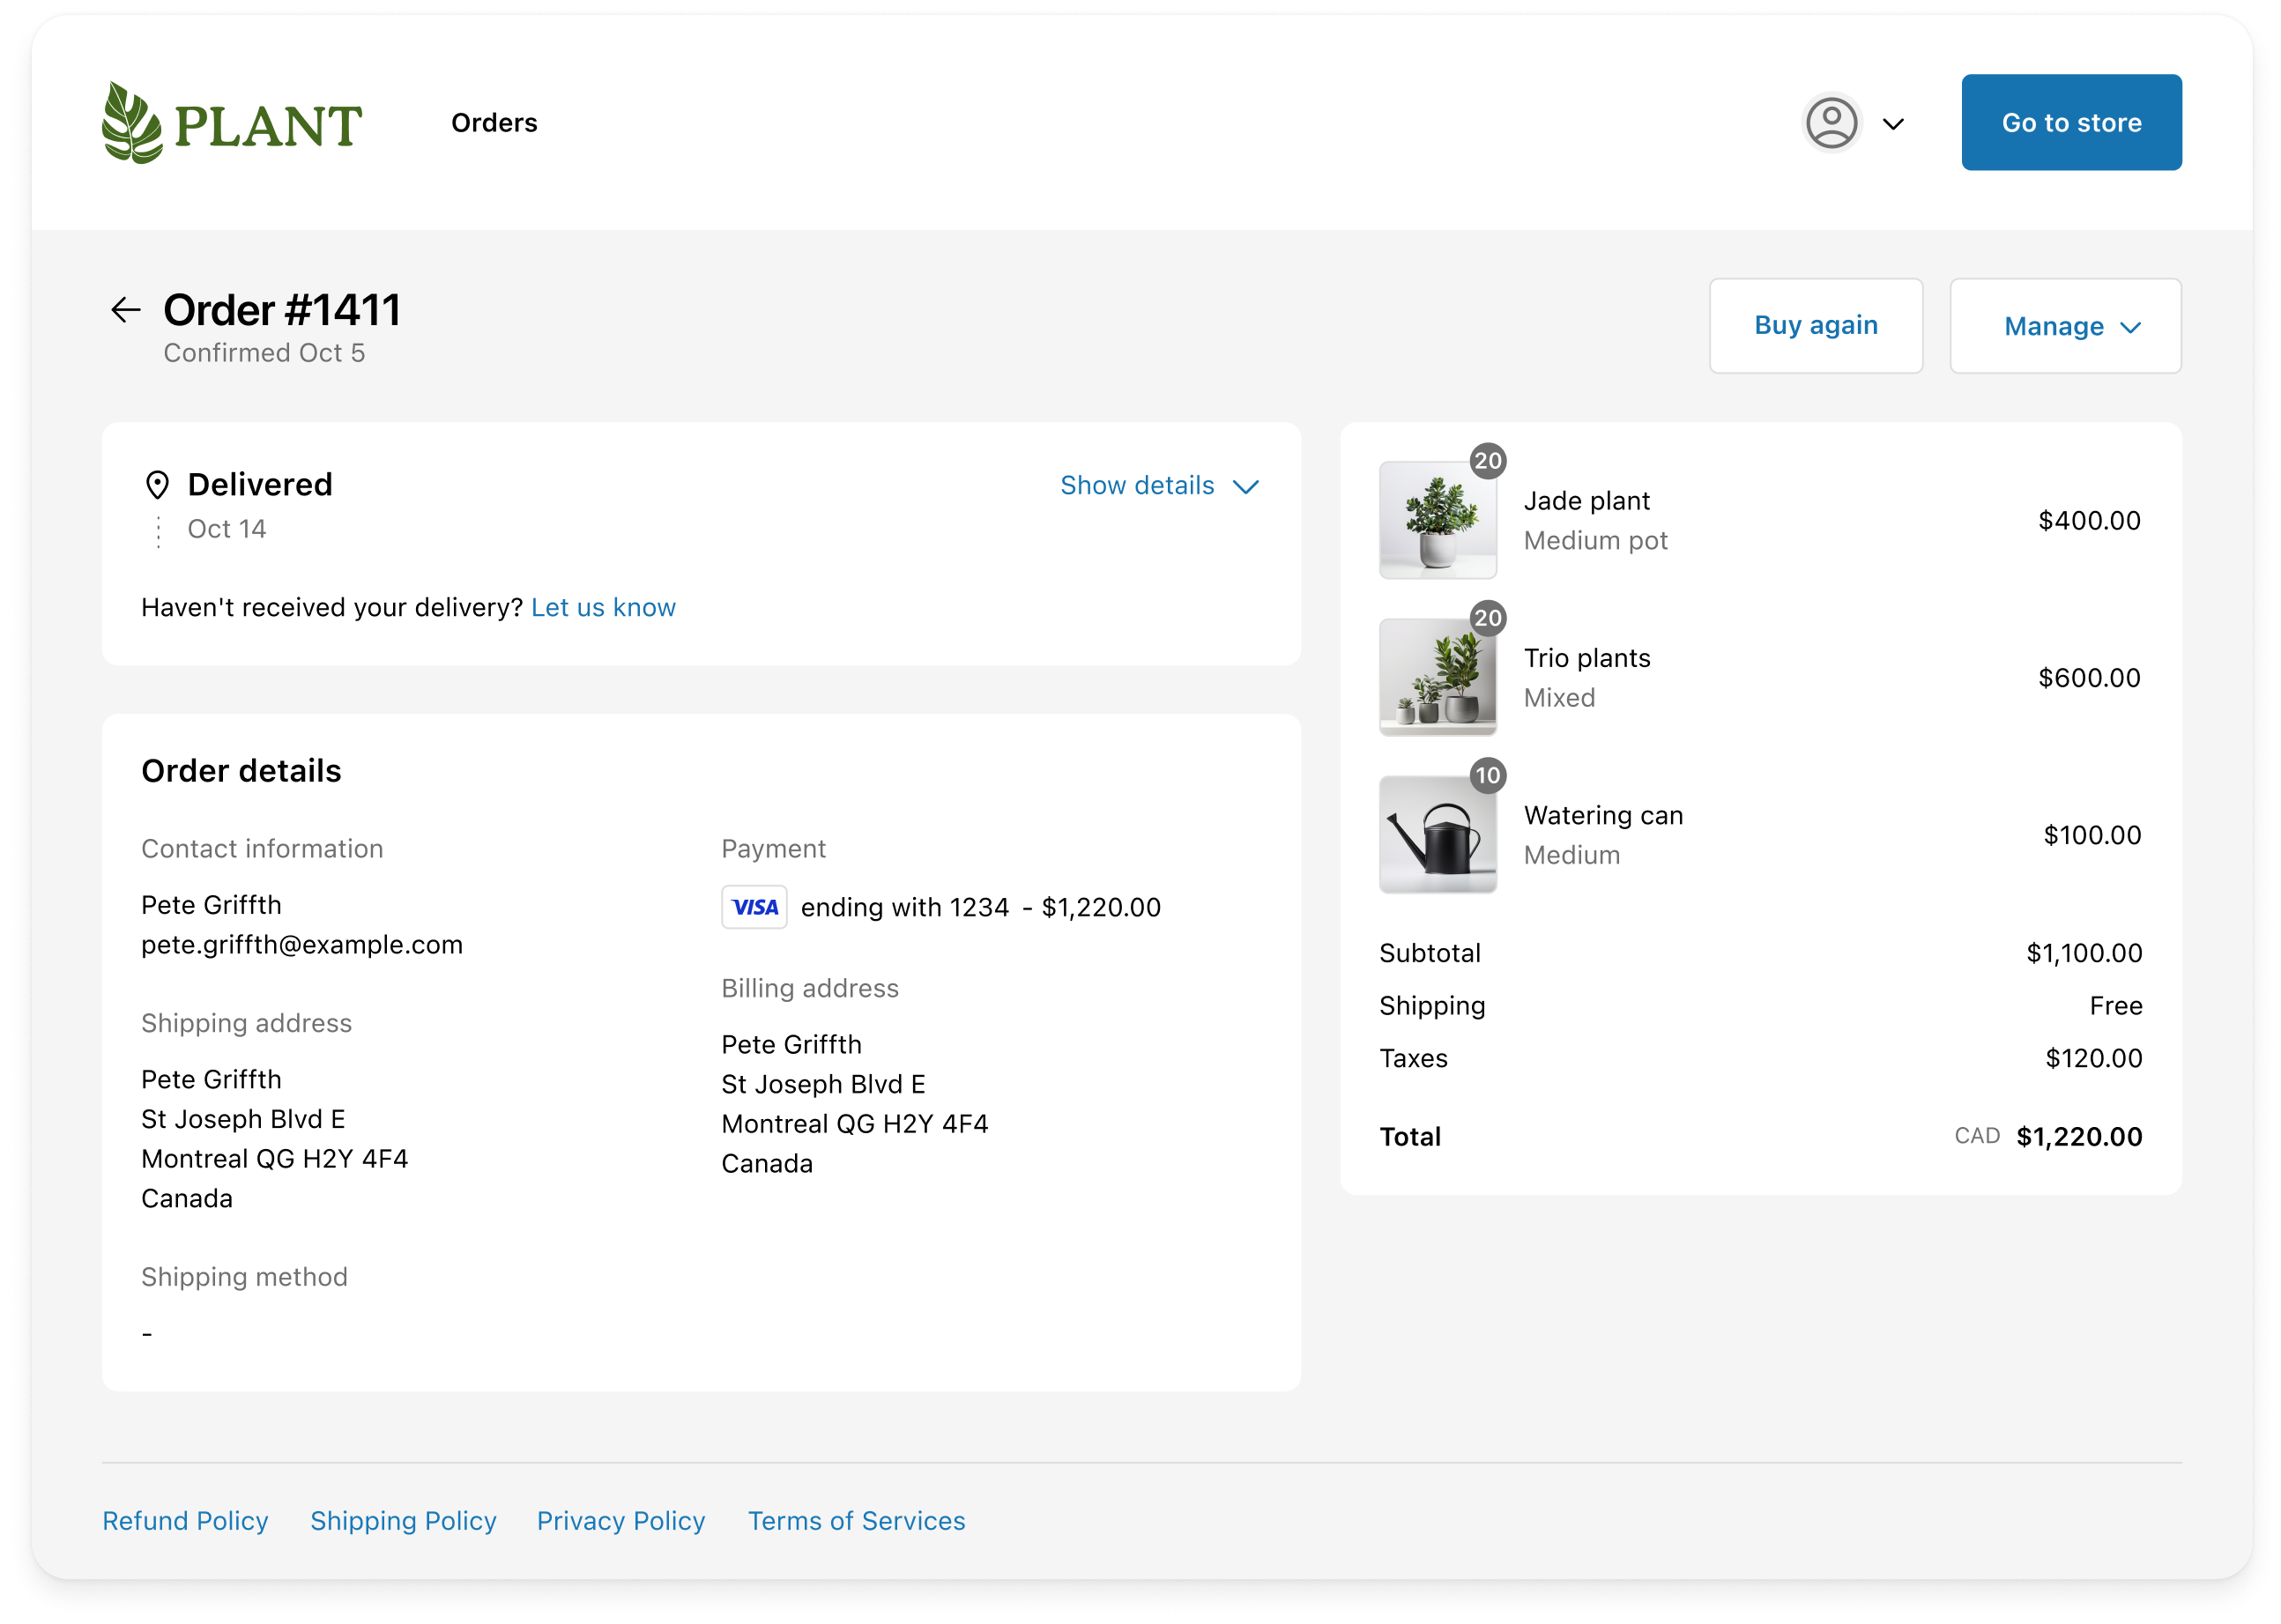 The Order Status page showing the plants that are included in the order, the total cost of $1,220, the Delivered status, and order details such as customer contact information, shipping and billing address, and payment information.